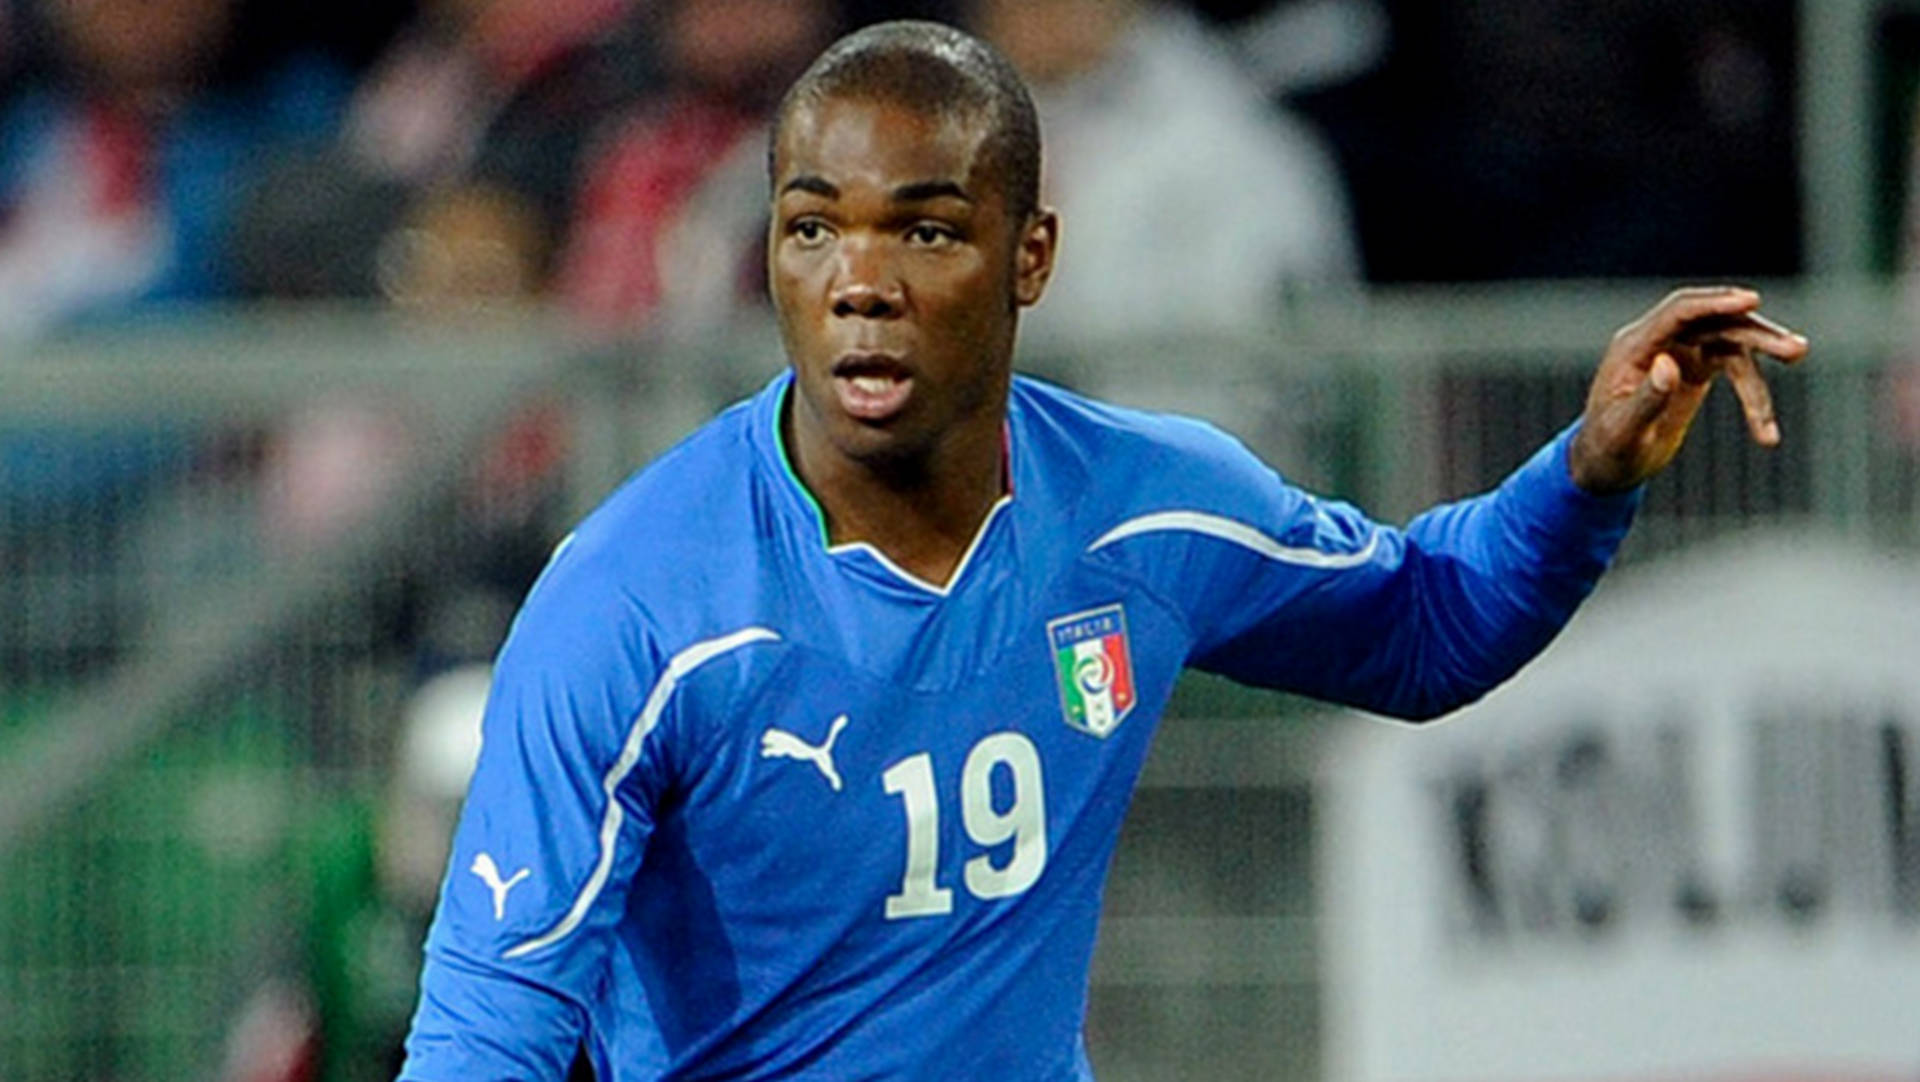 Angelo Ogbonna In Action - Soccer Game Moment Wallpaper